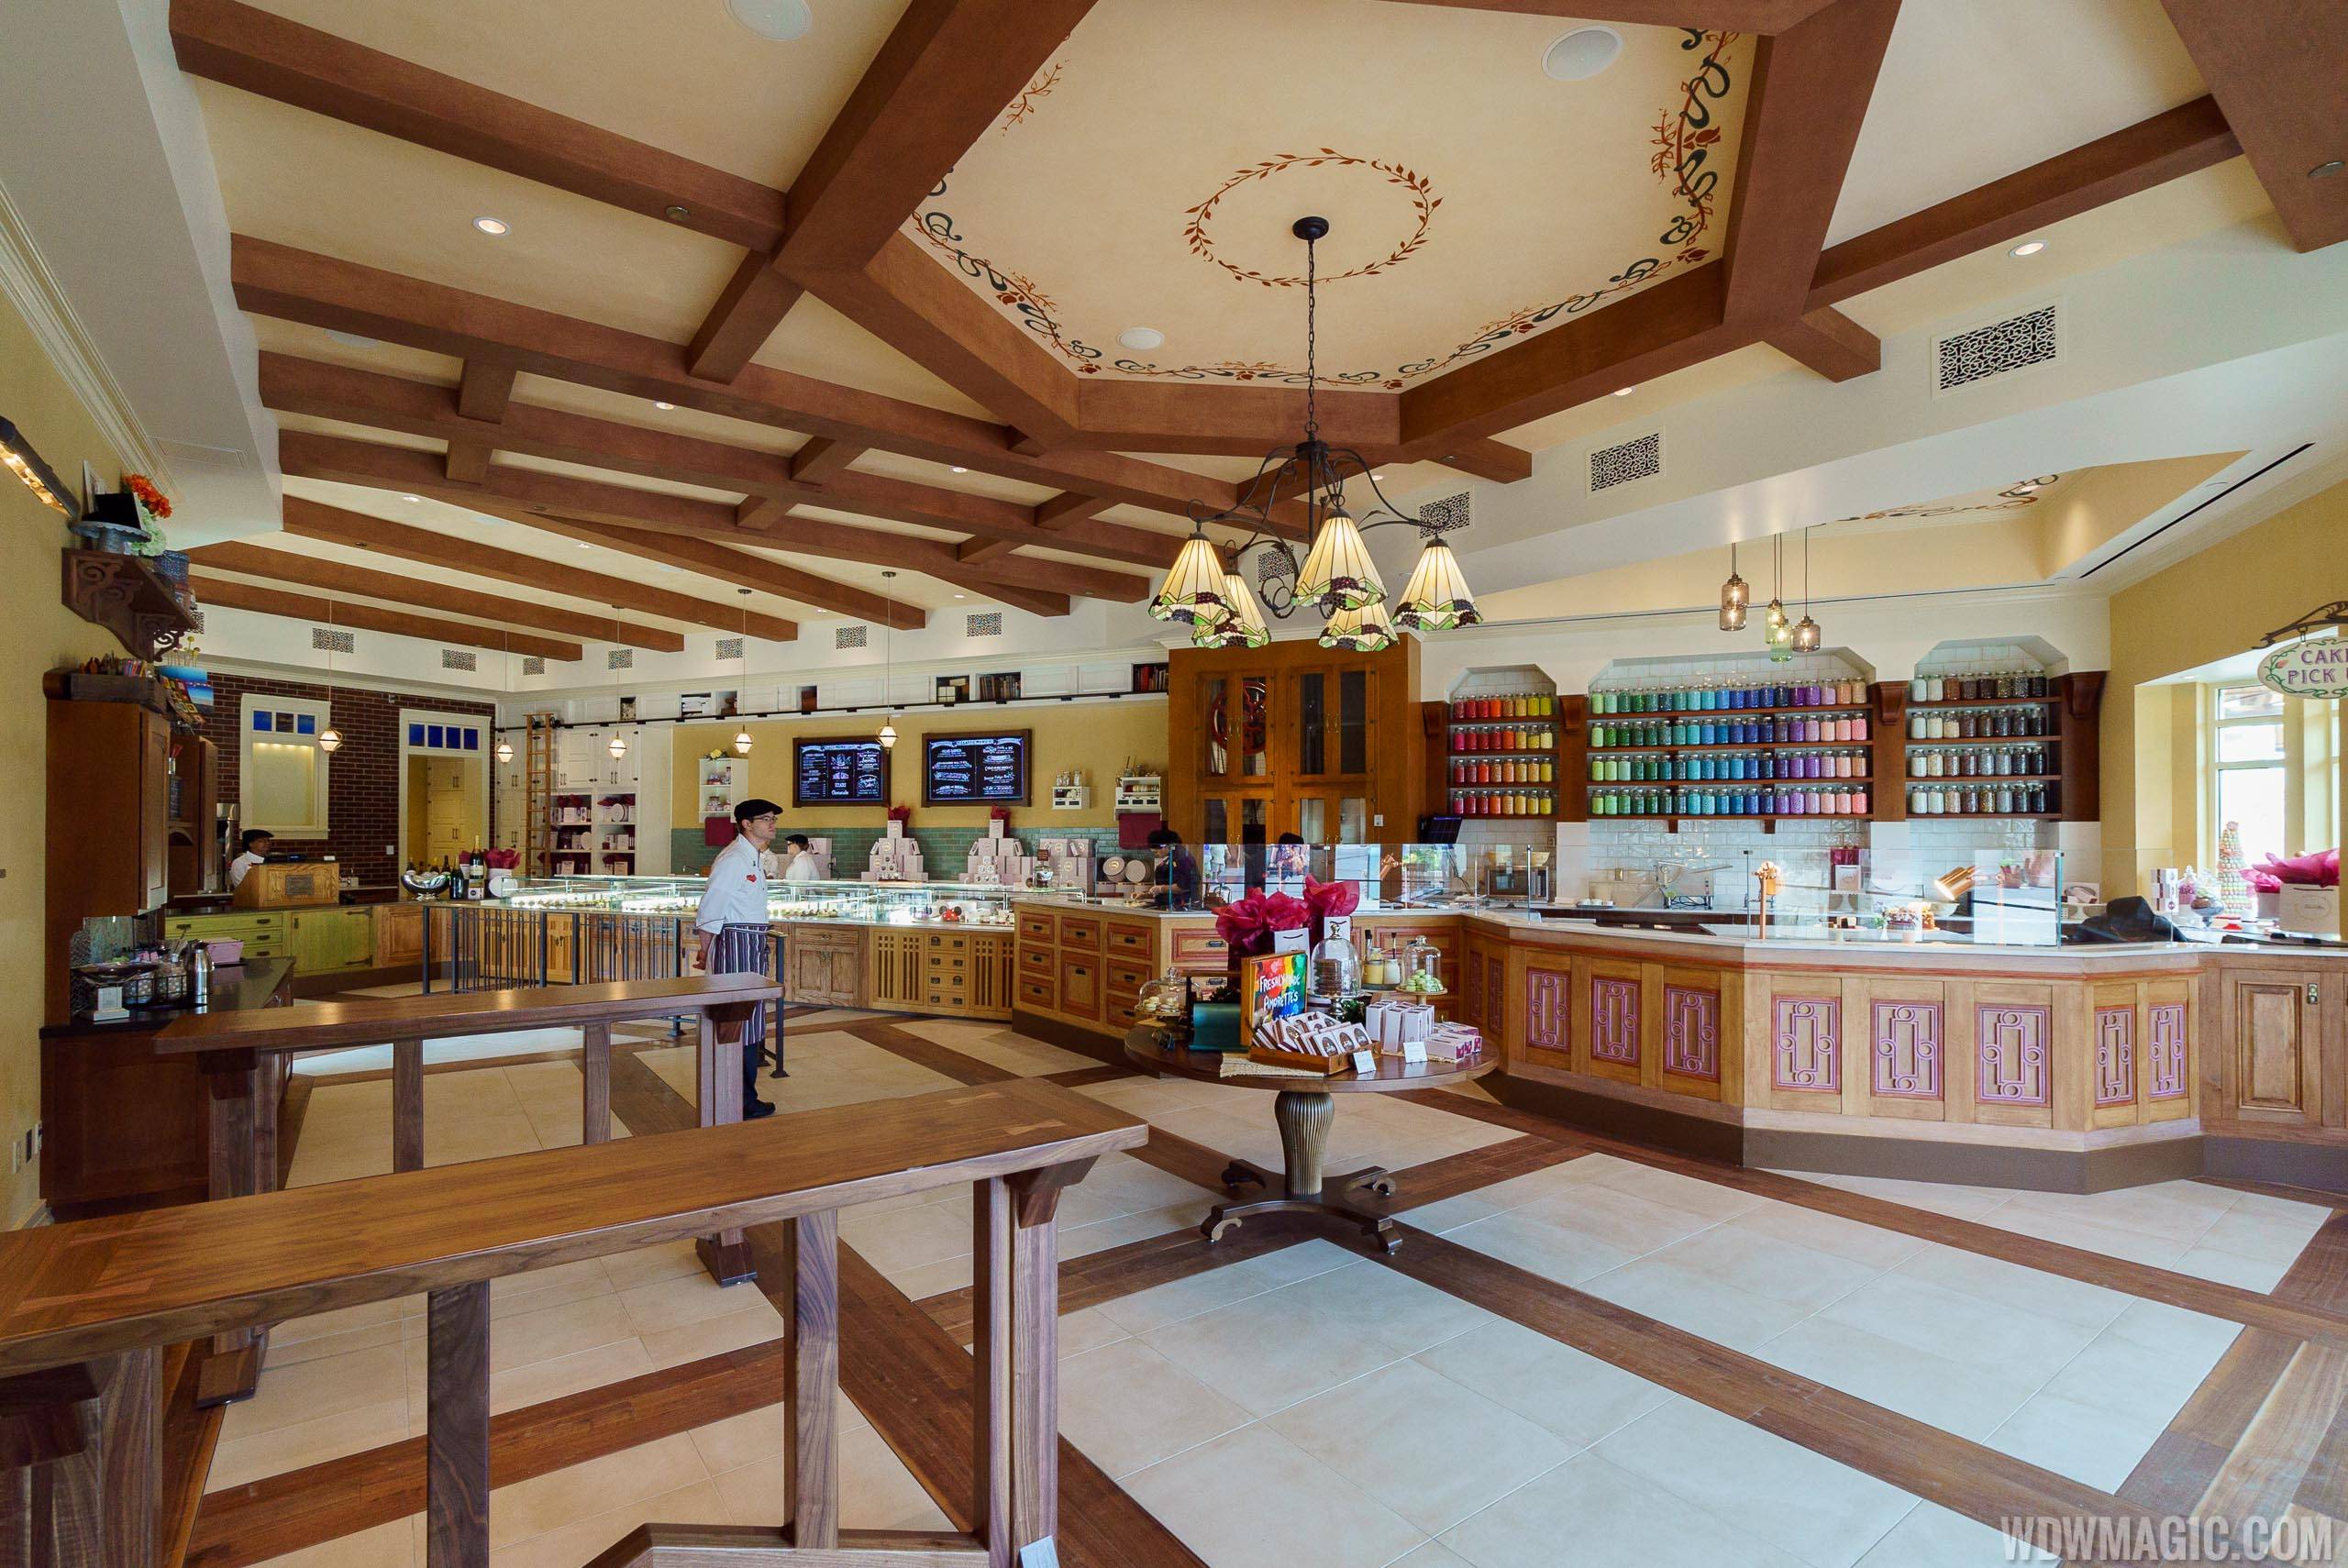 Mobile Order added at two more Walt Disney World dining locations